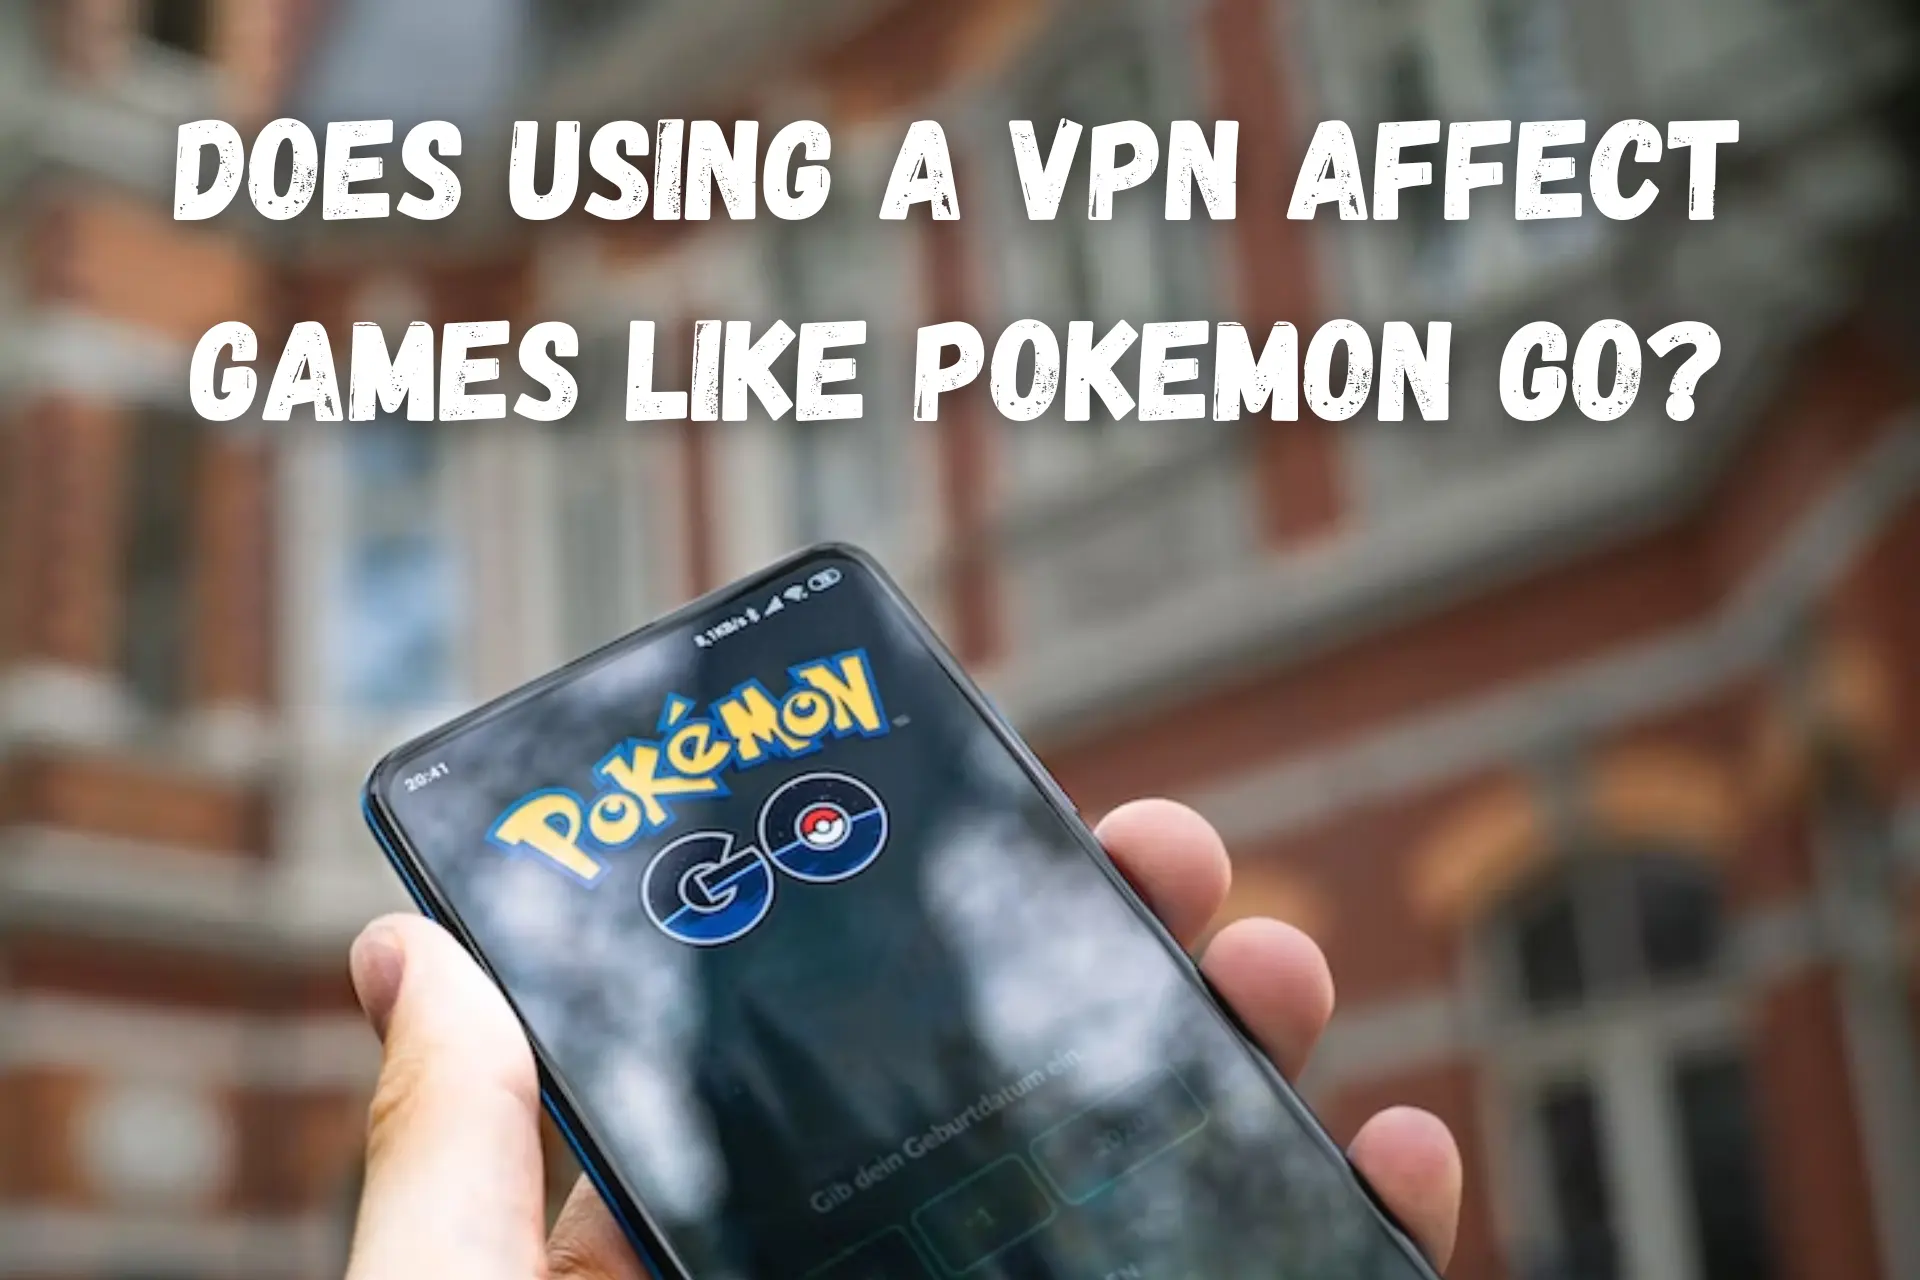 Does using a VPN affect games like Pokemon GO